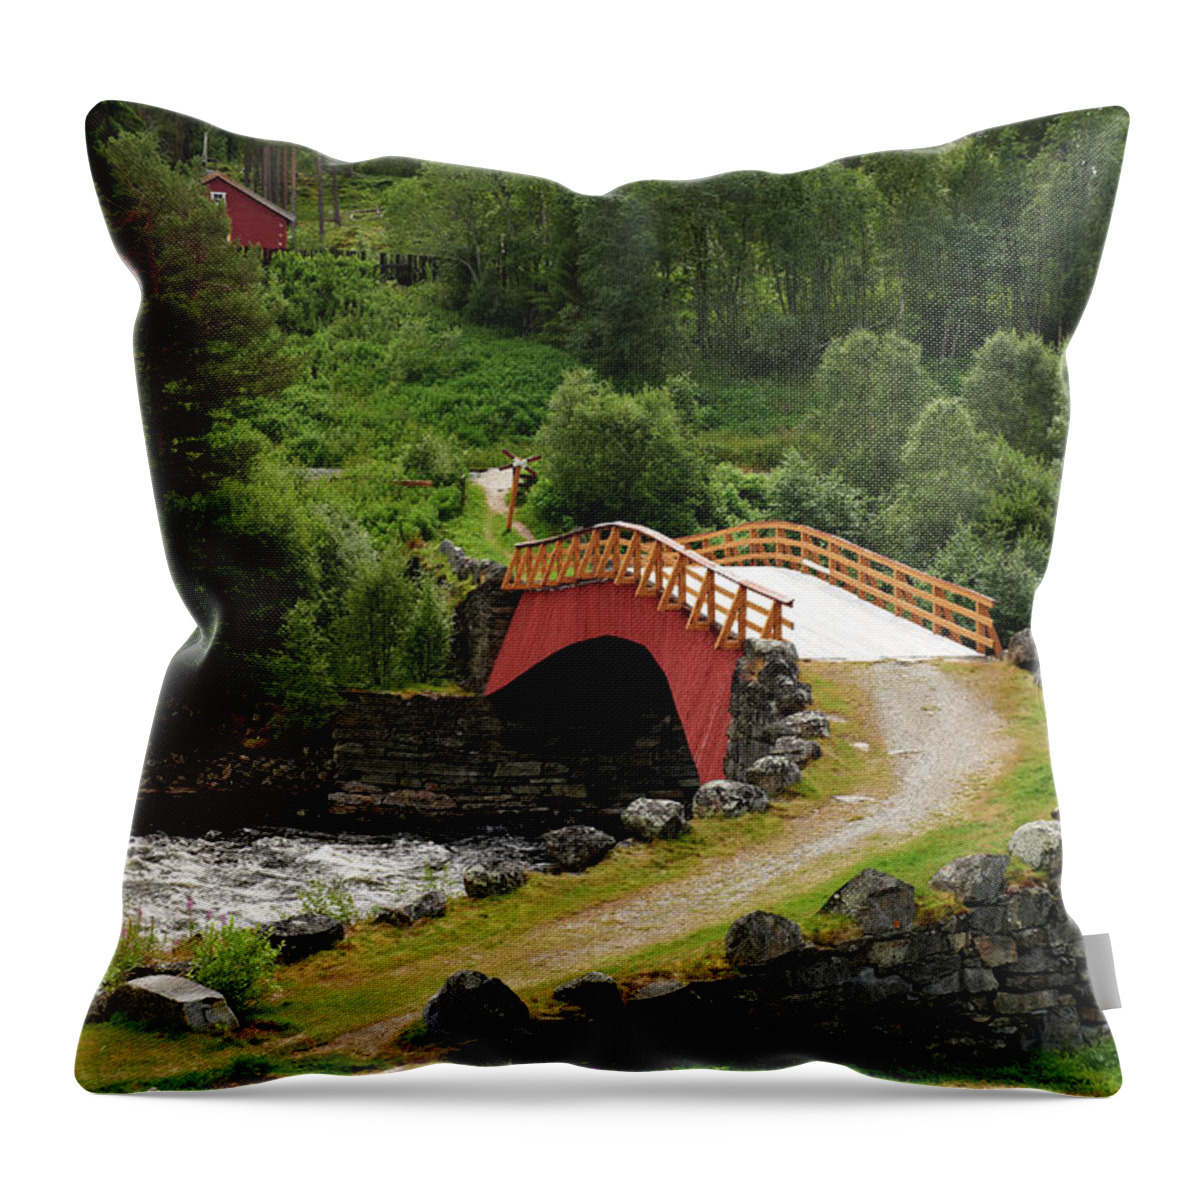 Scenics Throw Pillow featuring the photograph Roros, Old Mining Village, Norway #2 by Andrea Pistolesi